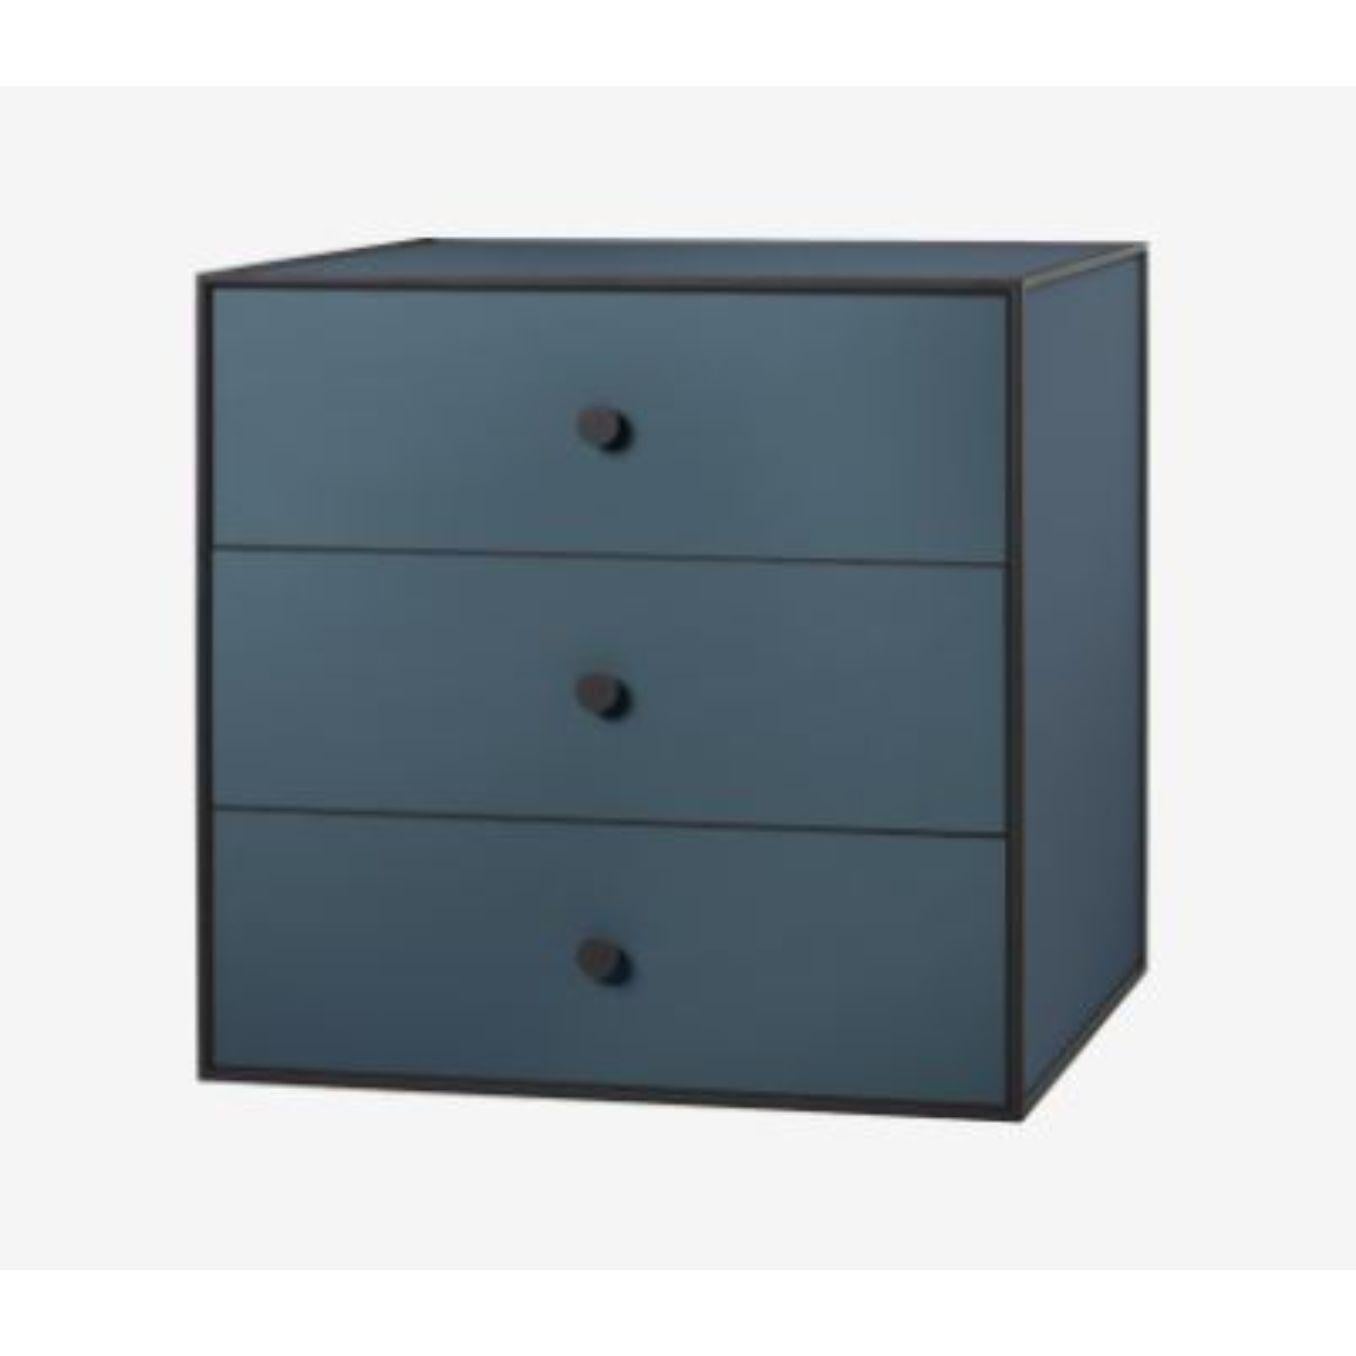 49 Fjord frame box with 3 drawers by Lassen
Dimensions: d 49 x w 42 x h 49 cm 
Materials: Finér, Melamin, Melamin, Melamine, Metal, Veneer
Also available in different colors and dimensions. 
Weight: 24 Kg


By Lassen is a Danish design brand